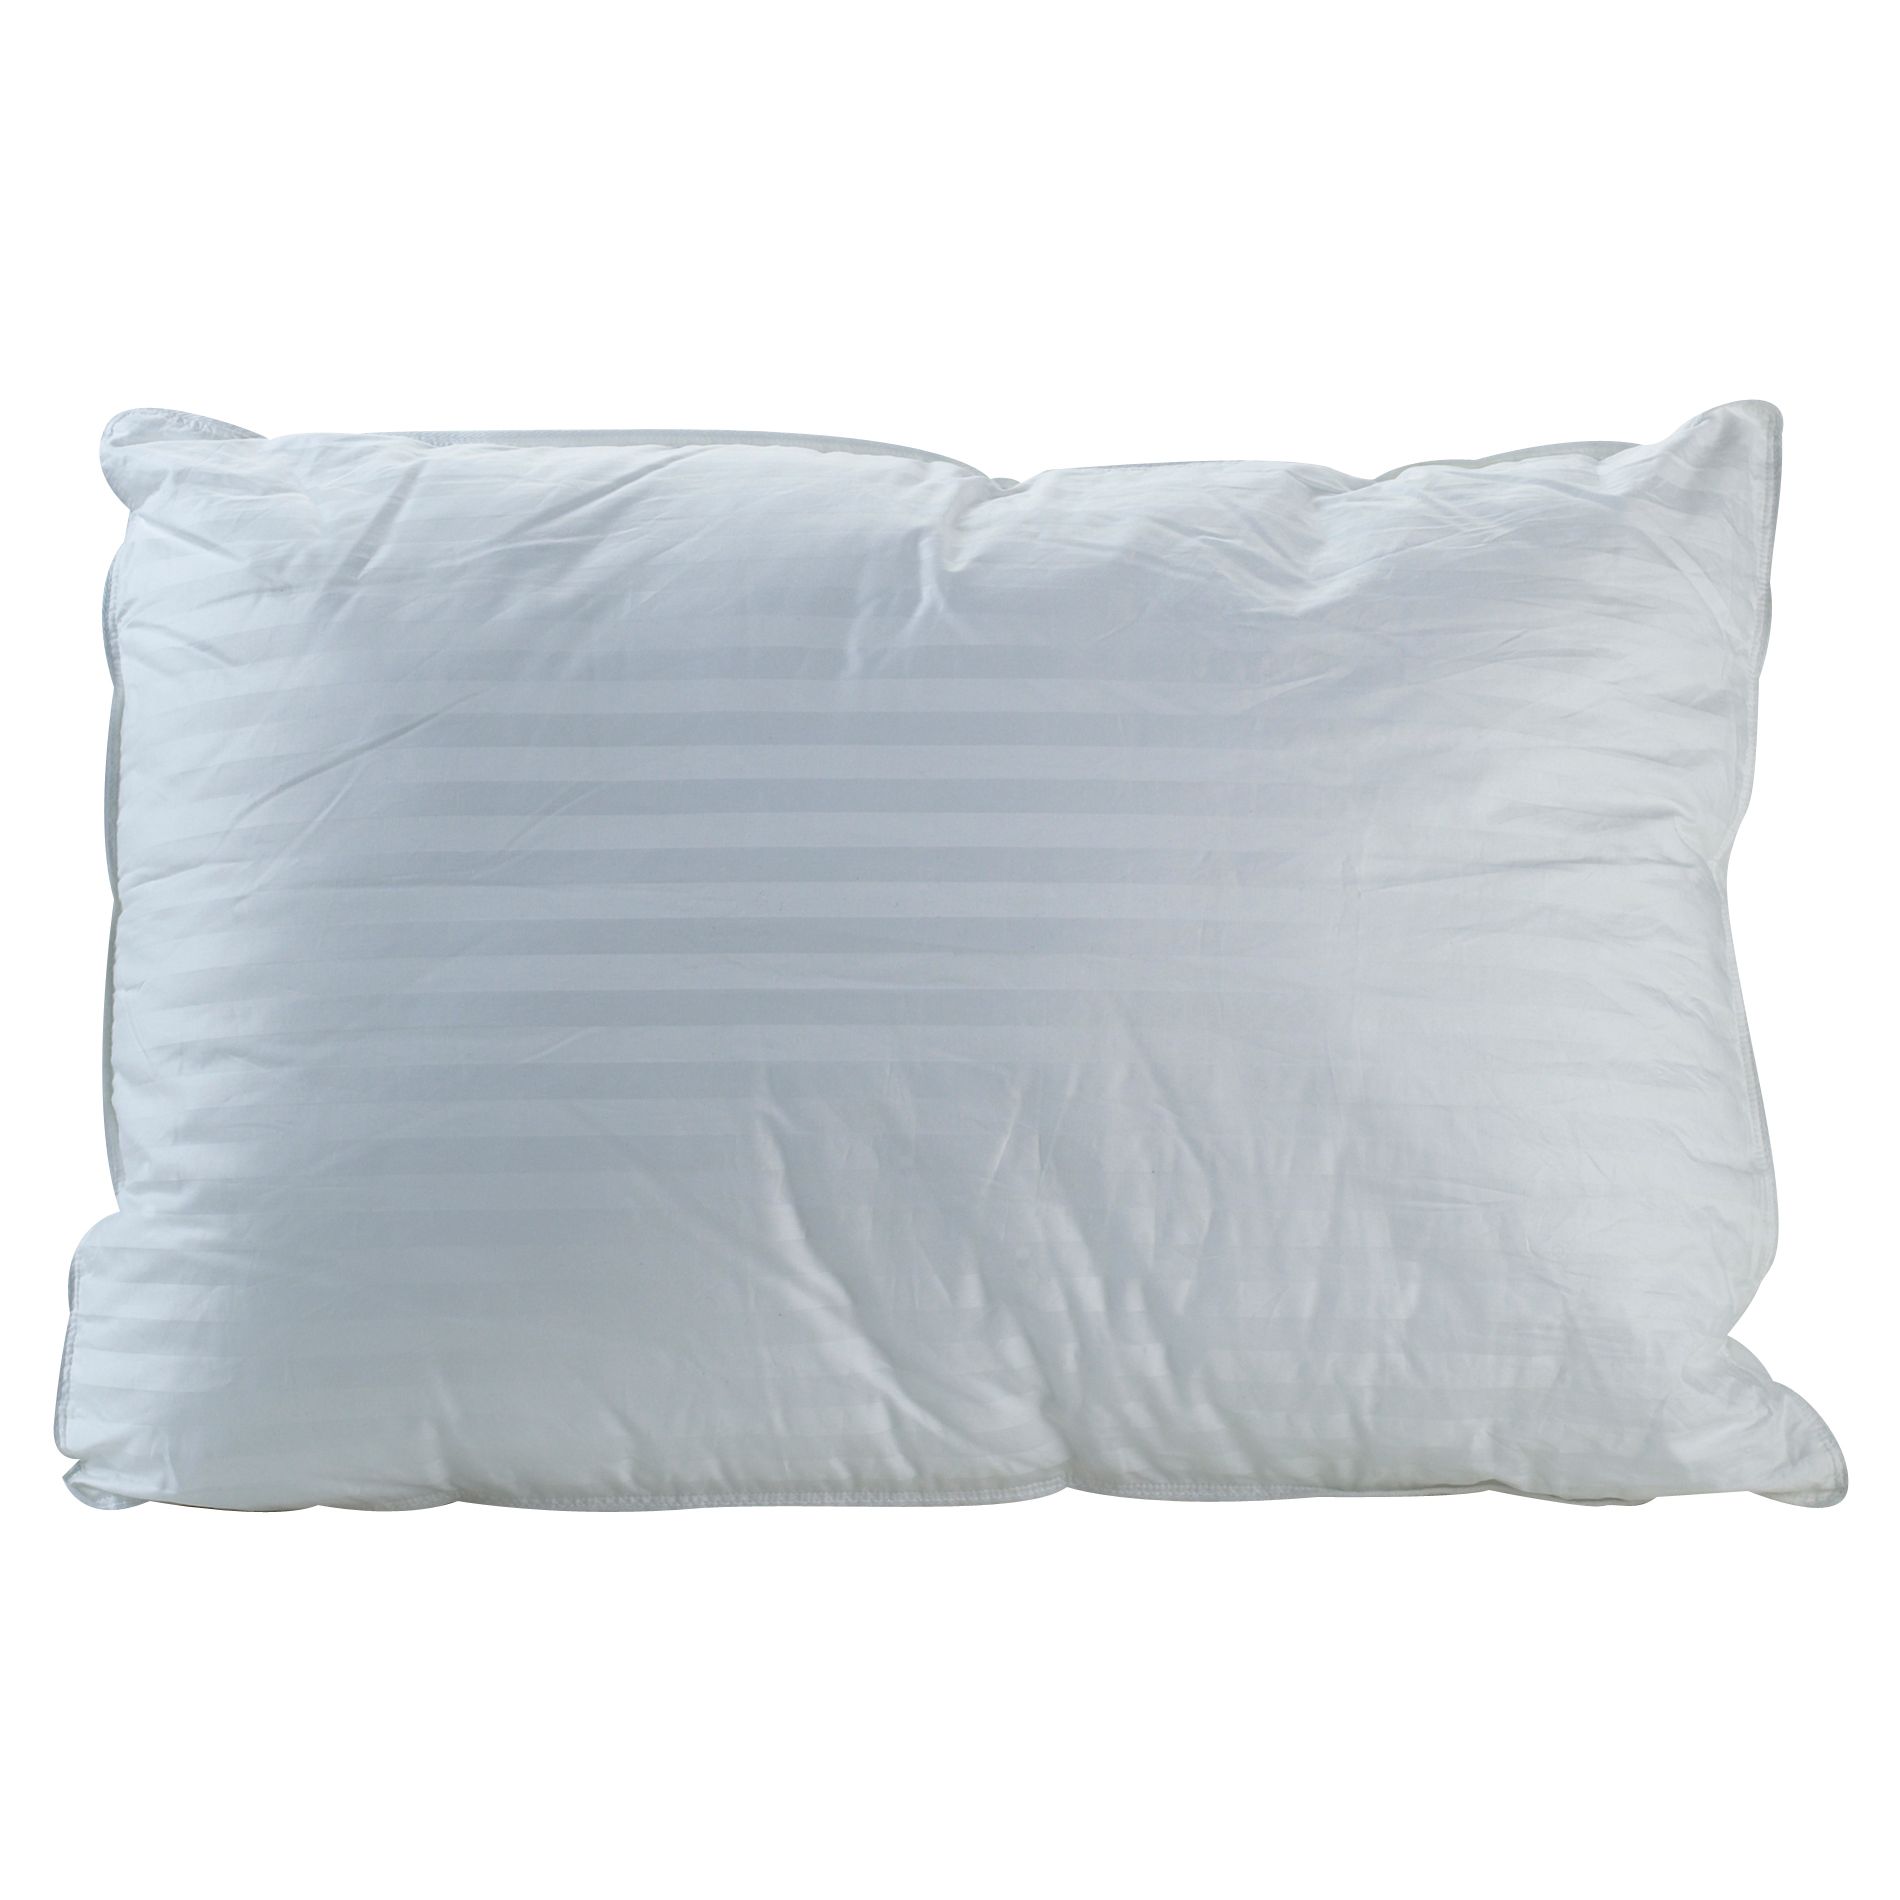 Cannon 300 Thread Count Egyptian Pillow